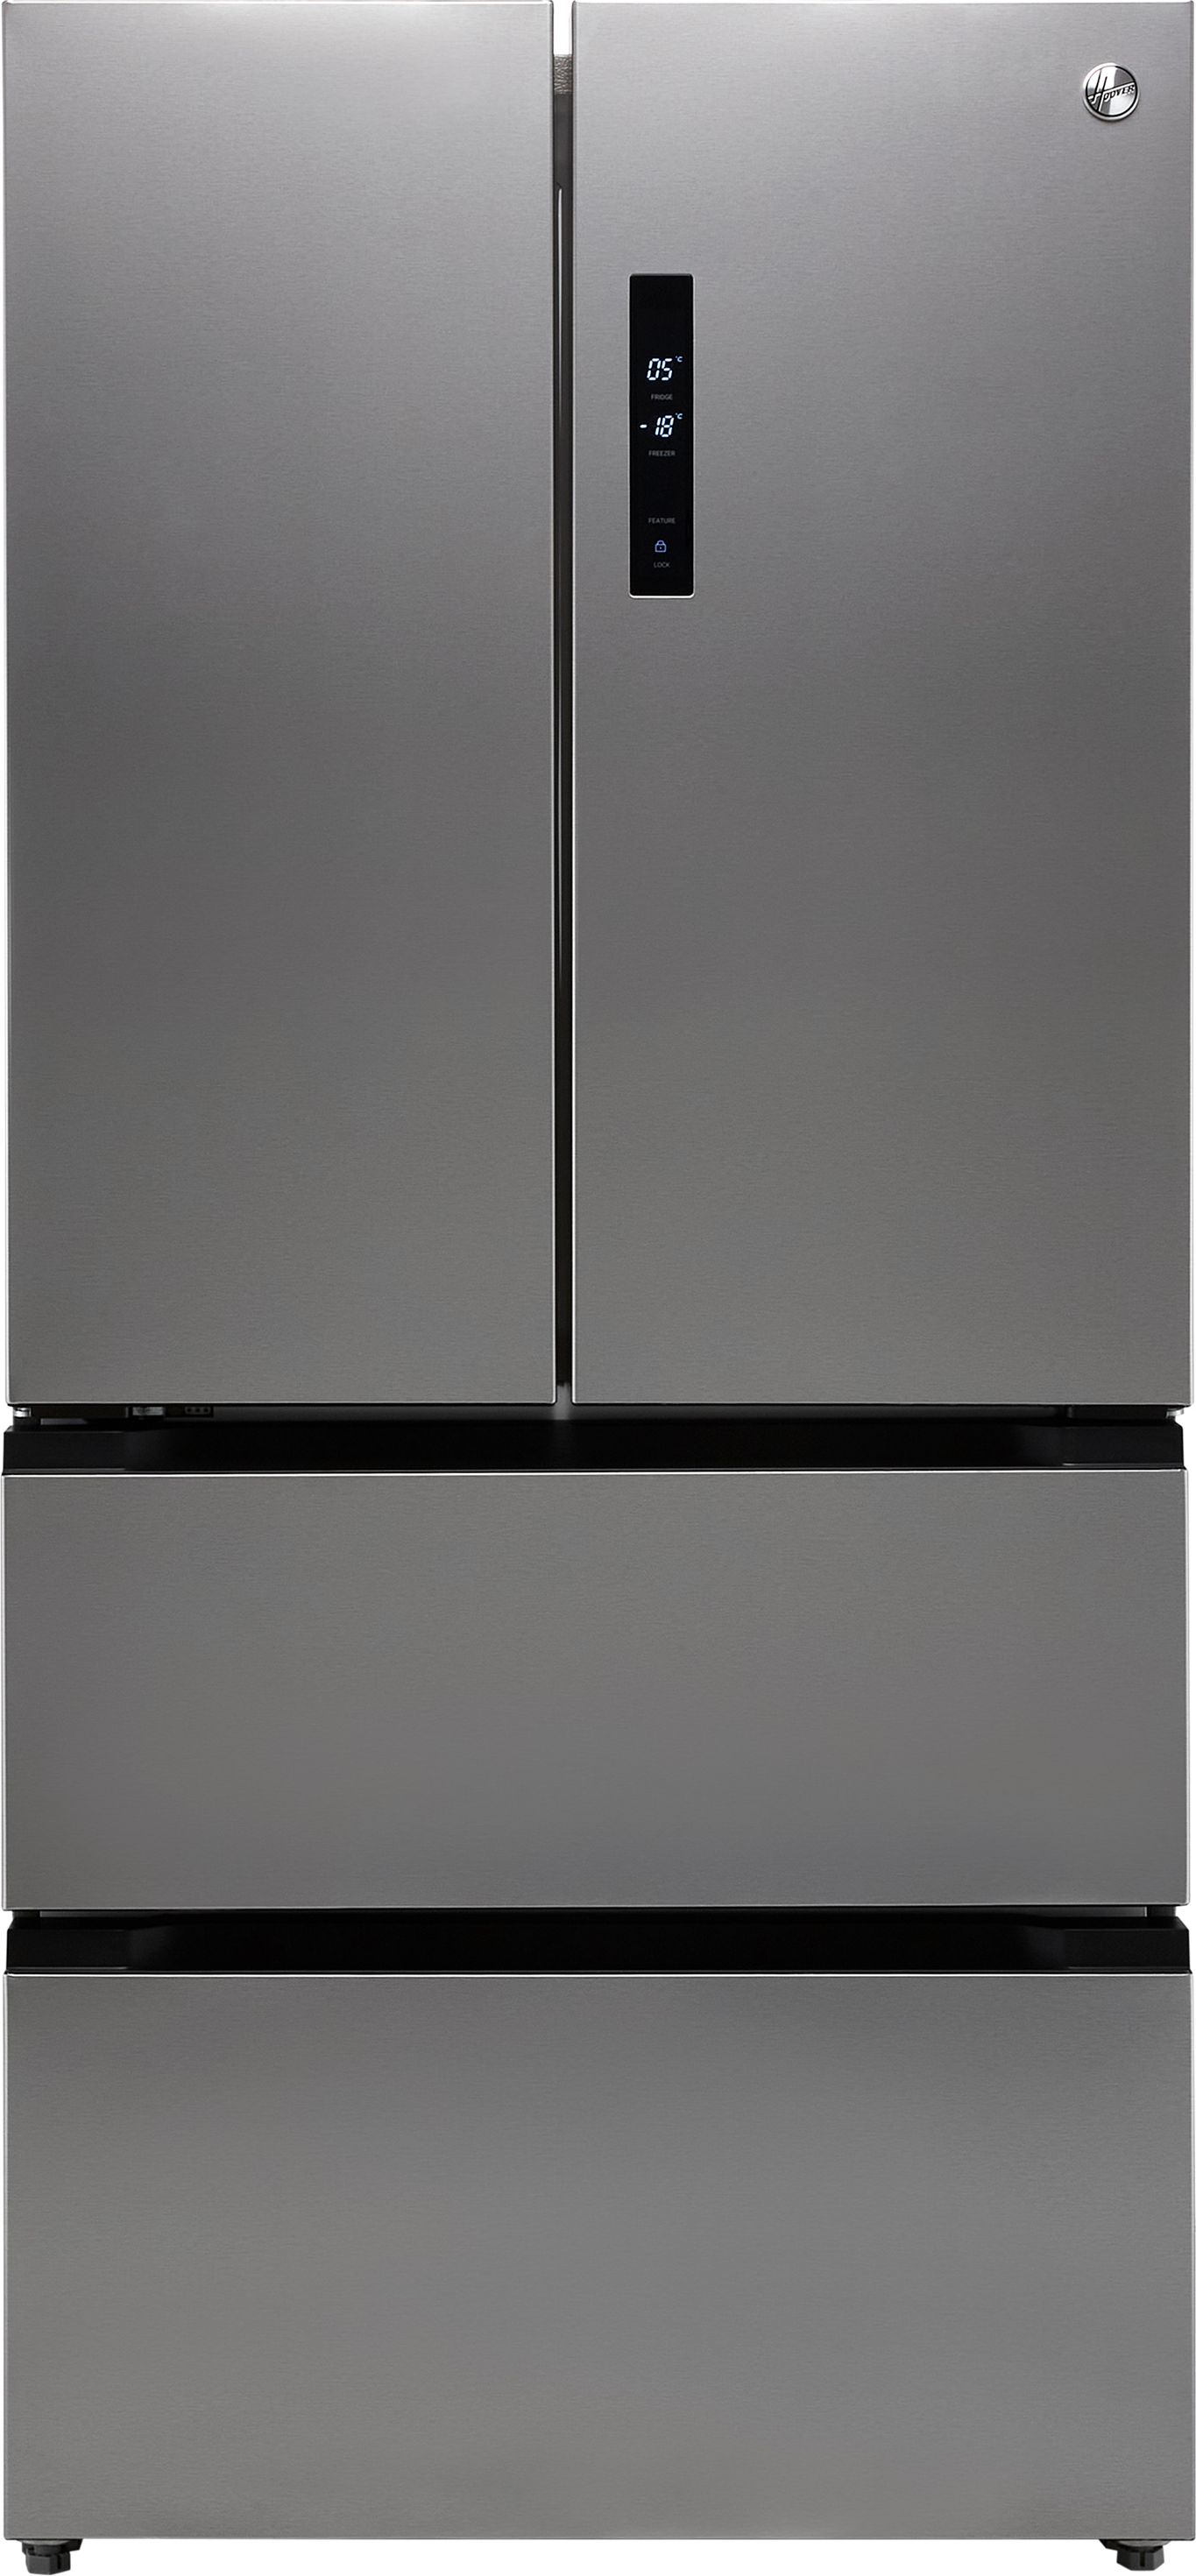 Hoover HSF818FXK Frost Free American Fridge Freezer - Stainless Steel - F Rated, Stainless Steel